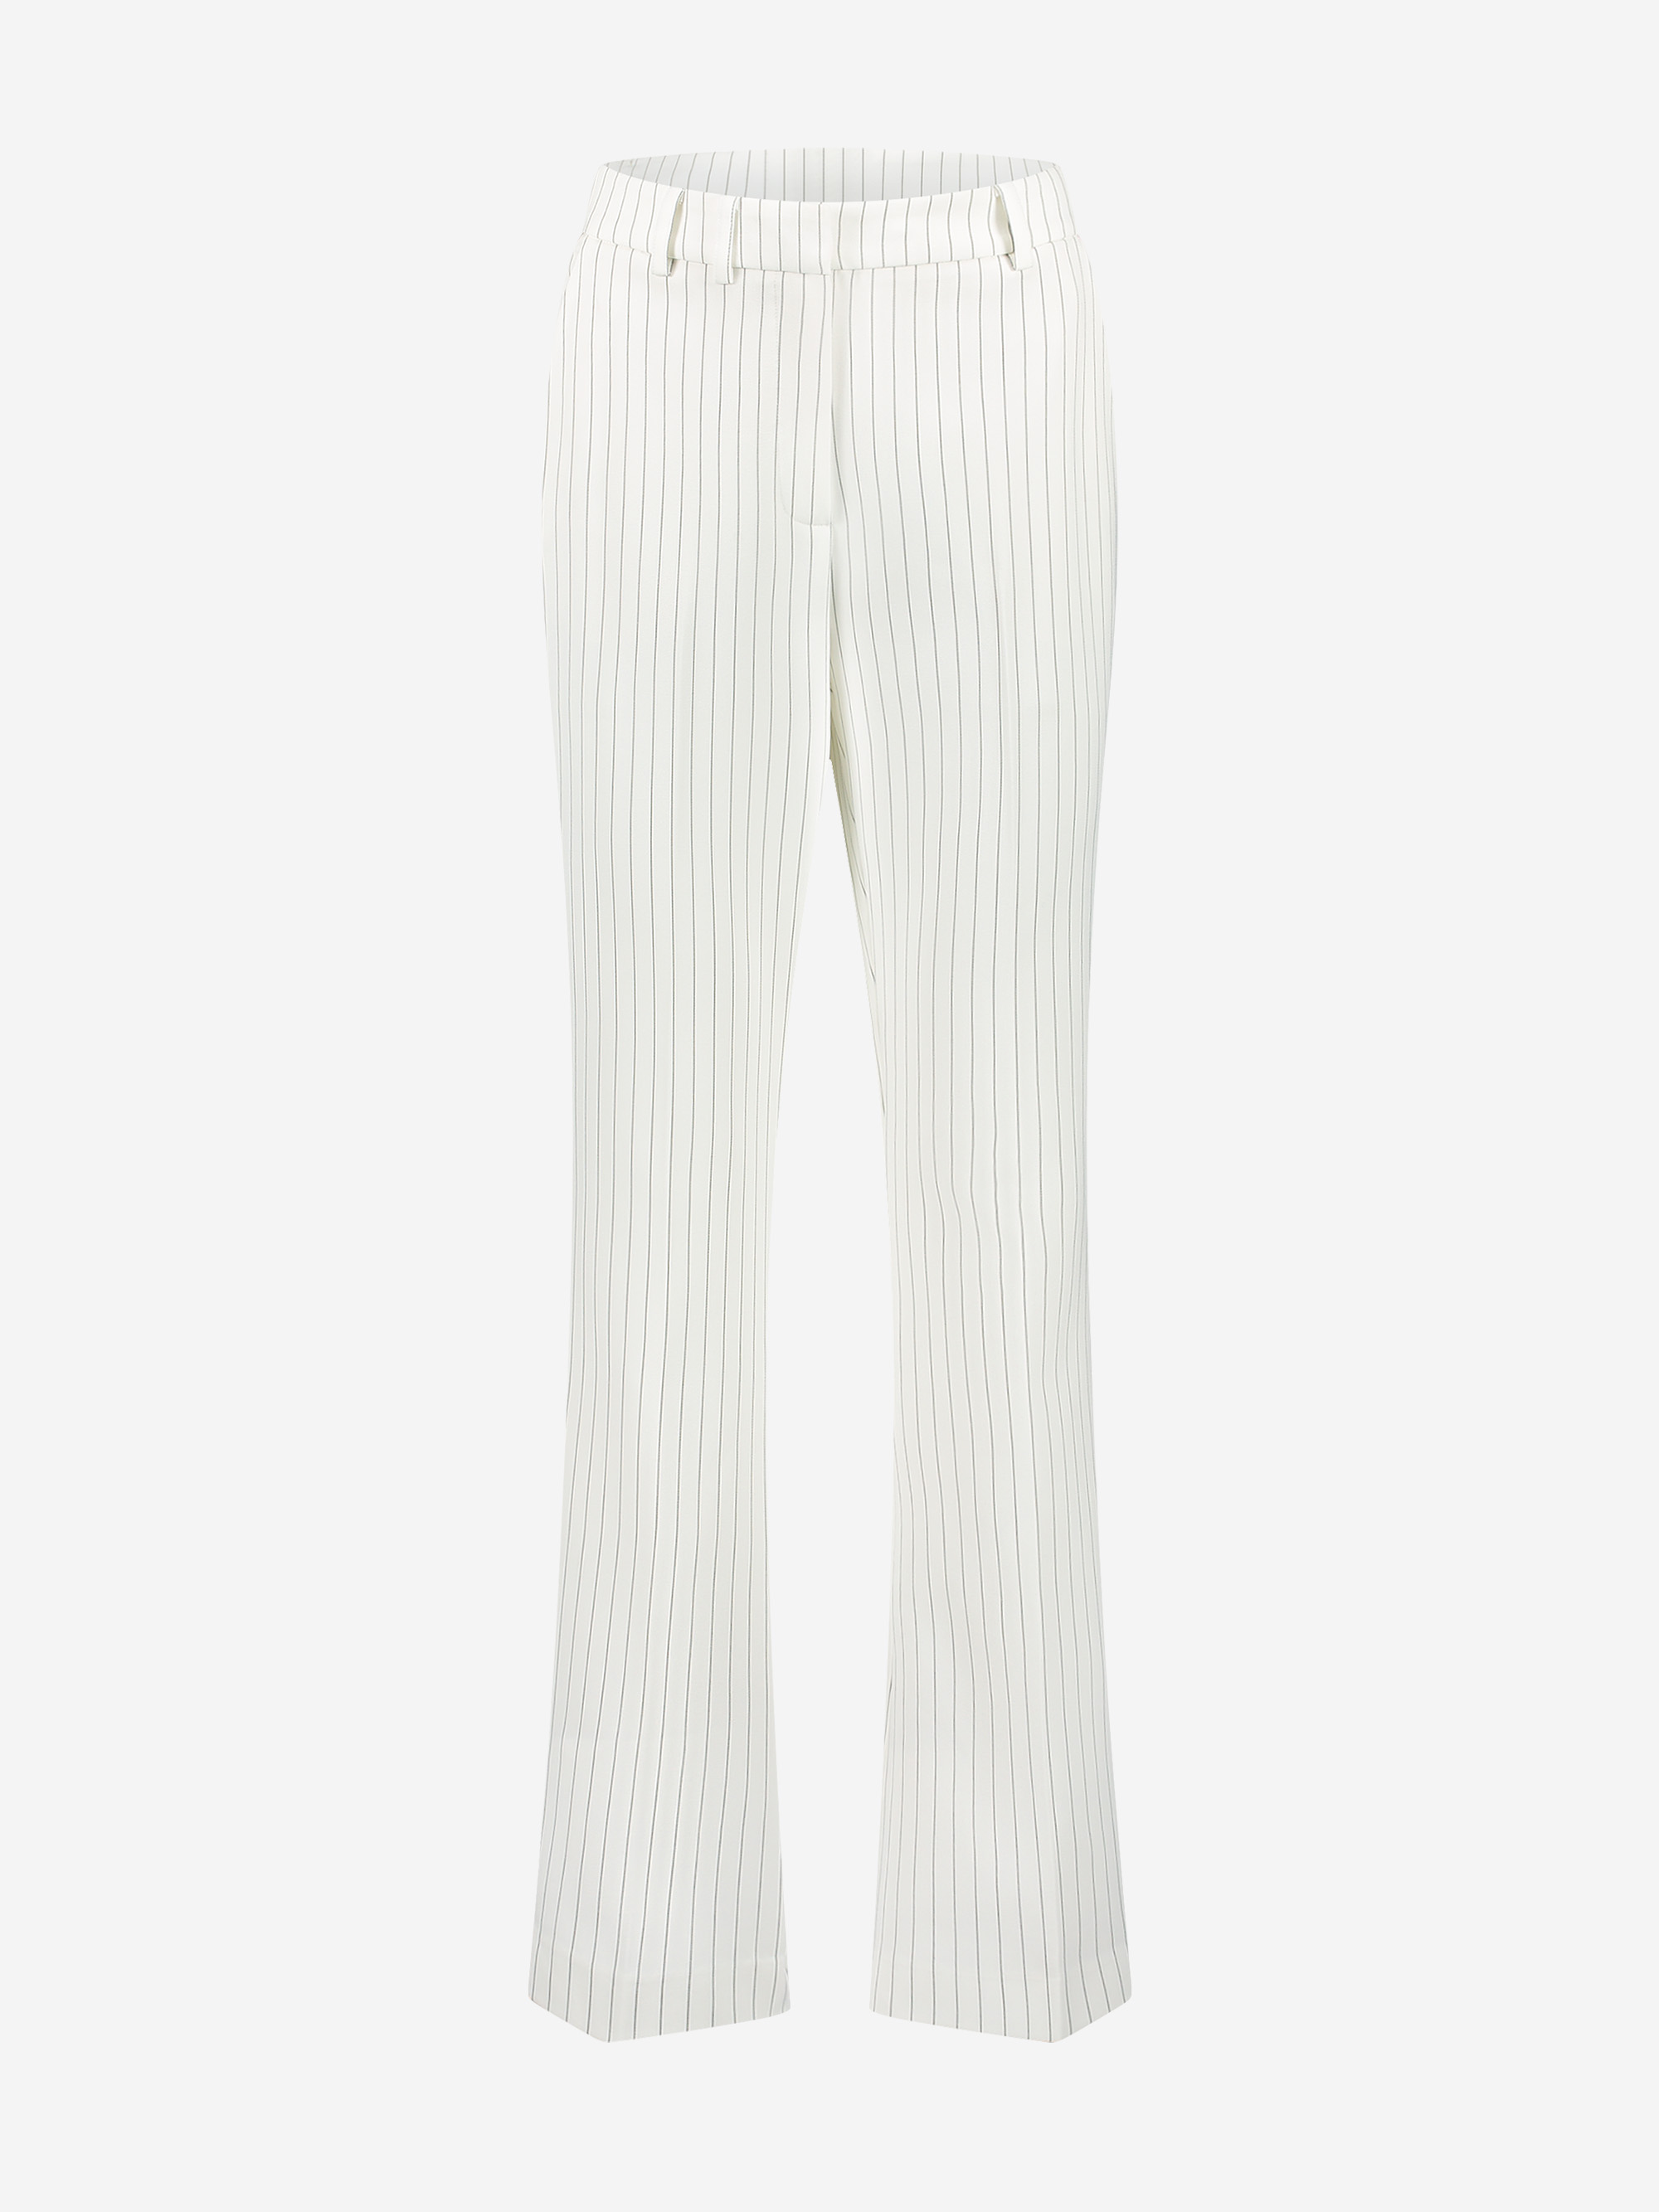 Trousers with pinstripe